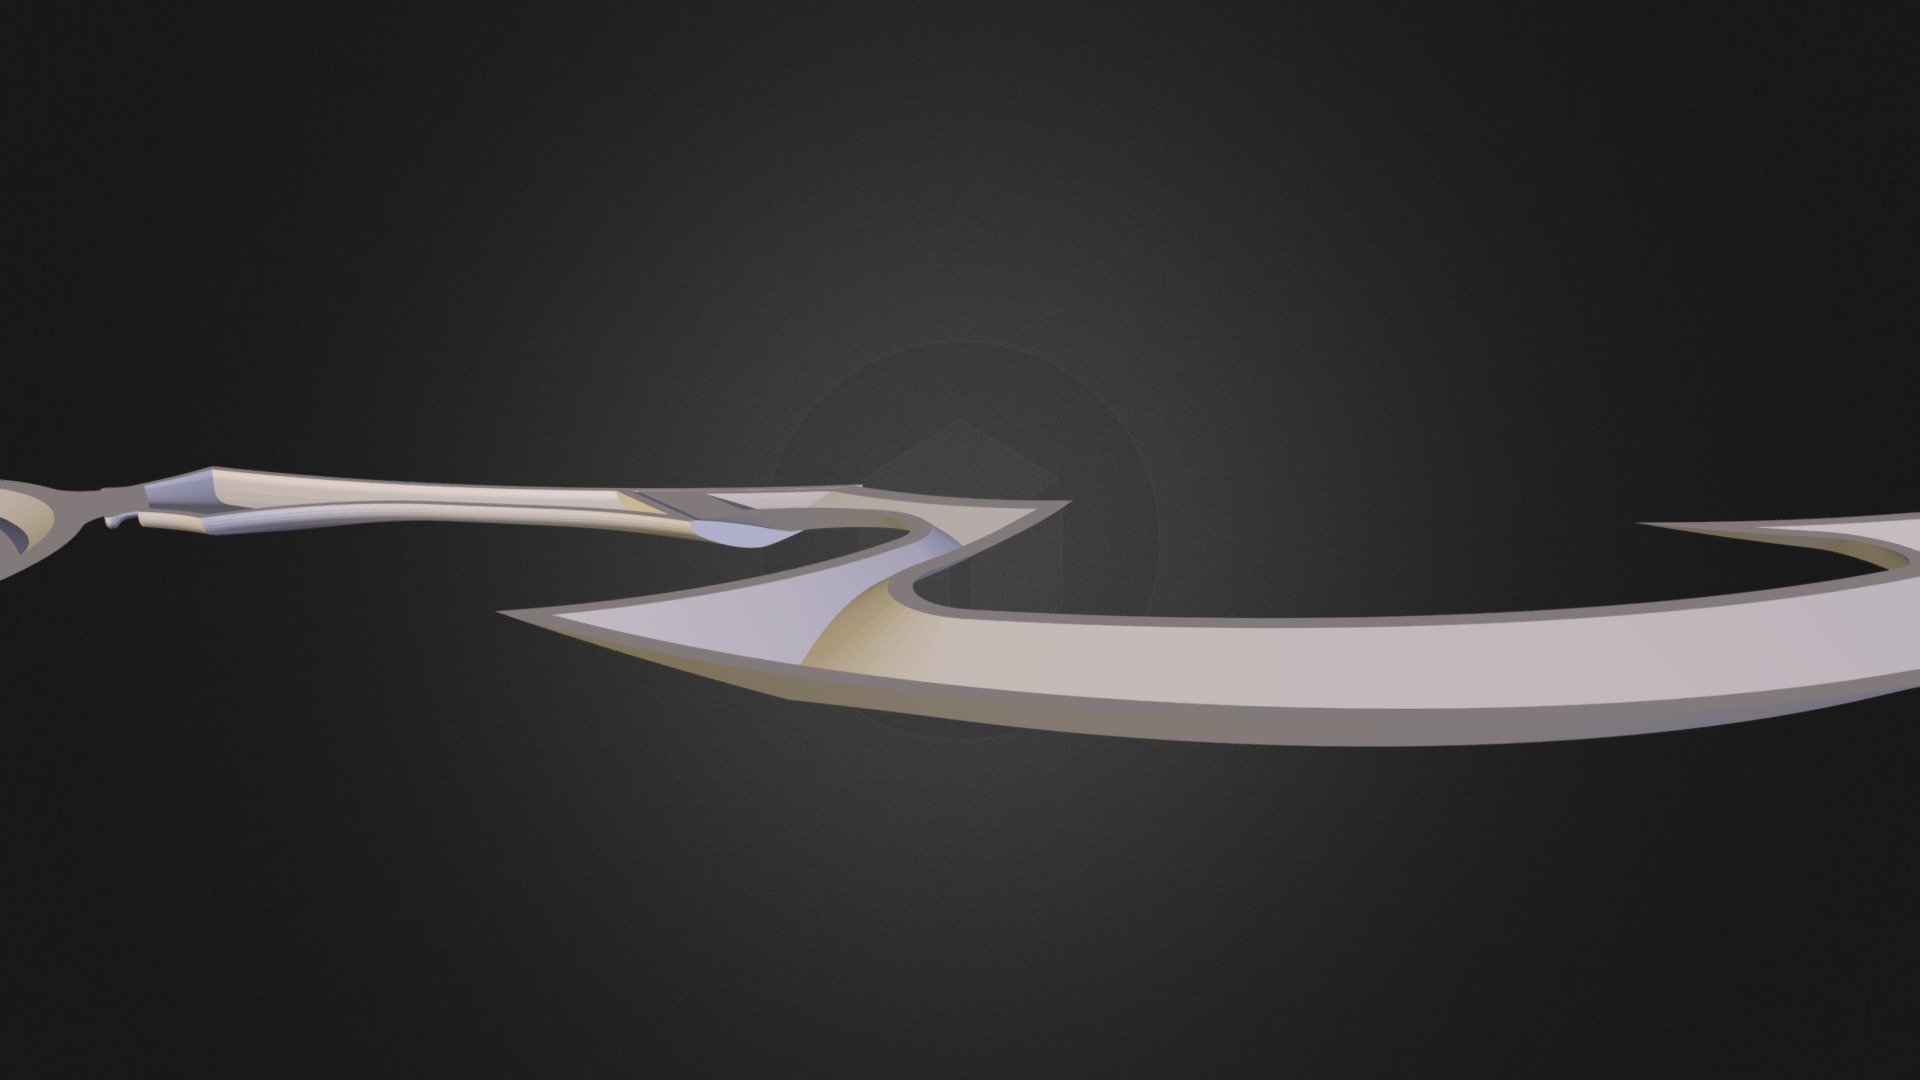 Diana's Crescent Blade - Final Section